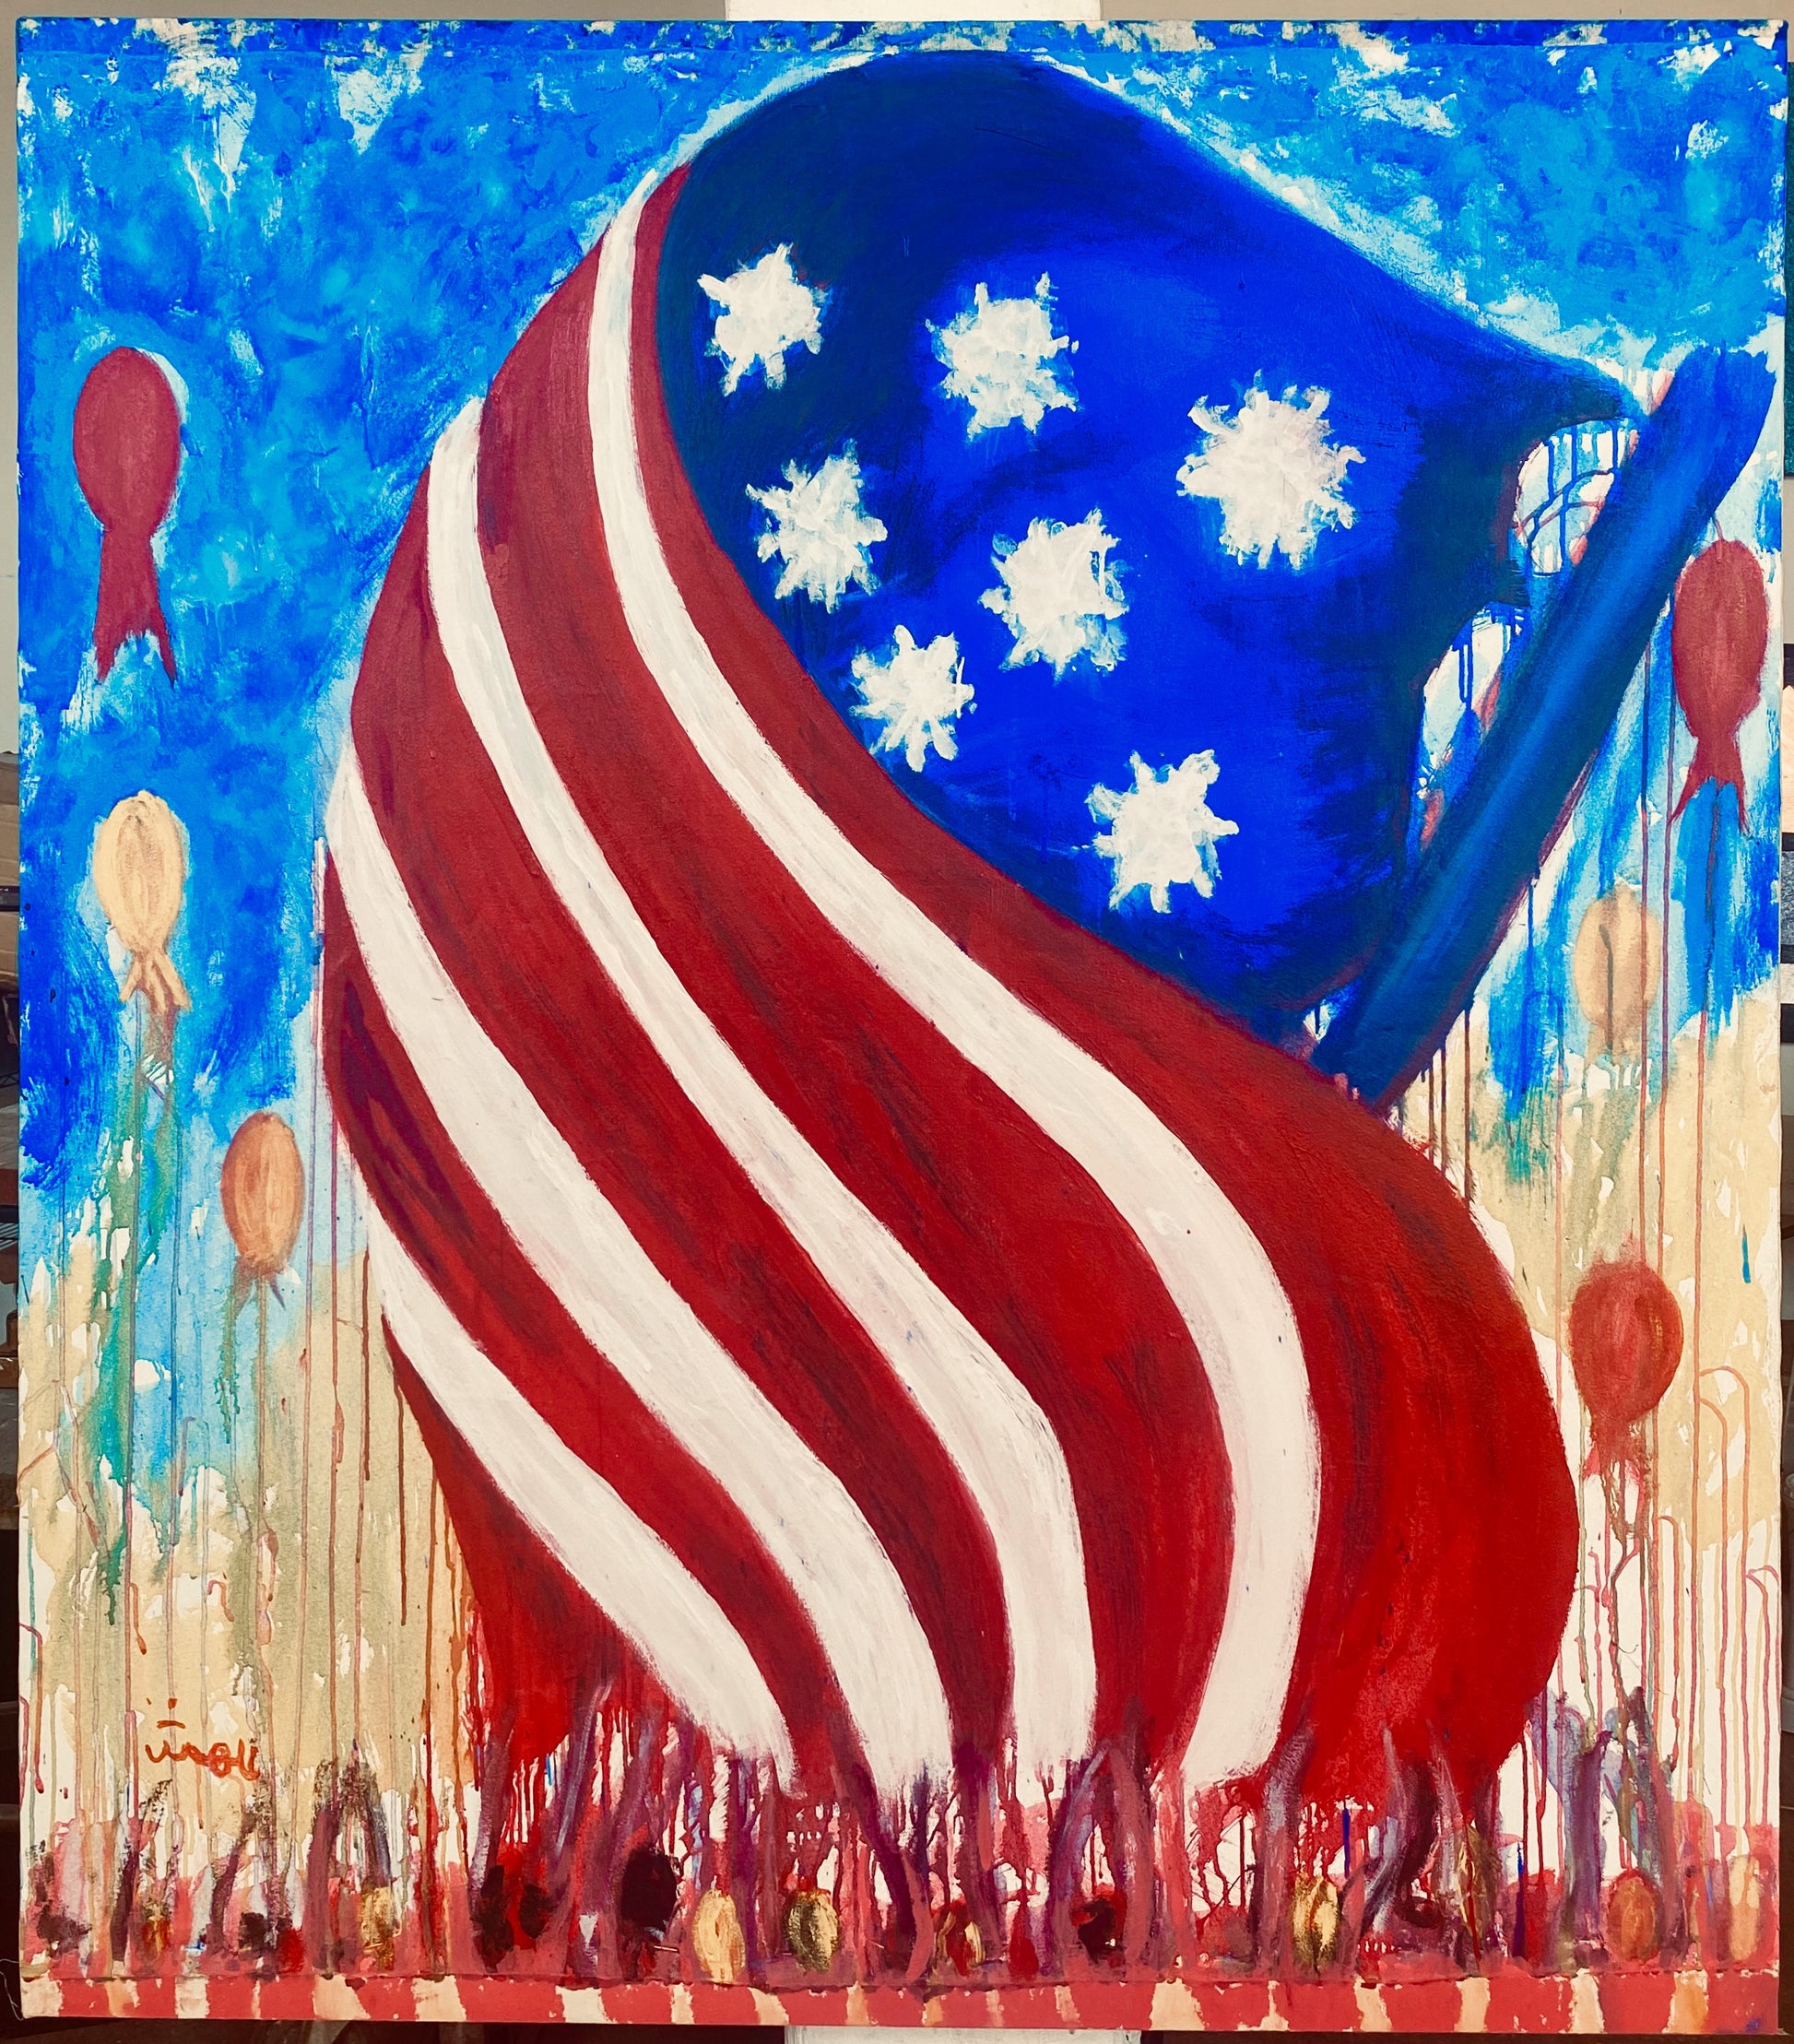 Dedicated:  To All  and Everyone, who calls this place “Home”  We Are All Created Equal and Should Be Granted The Same Rights And Freedoms.  This is a Canvas painting by artist, Shahla Rahimi Reynolds.  It is 36” H x 24” W.